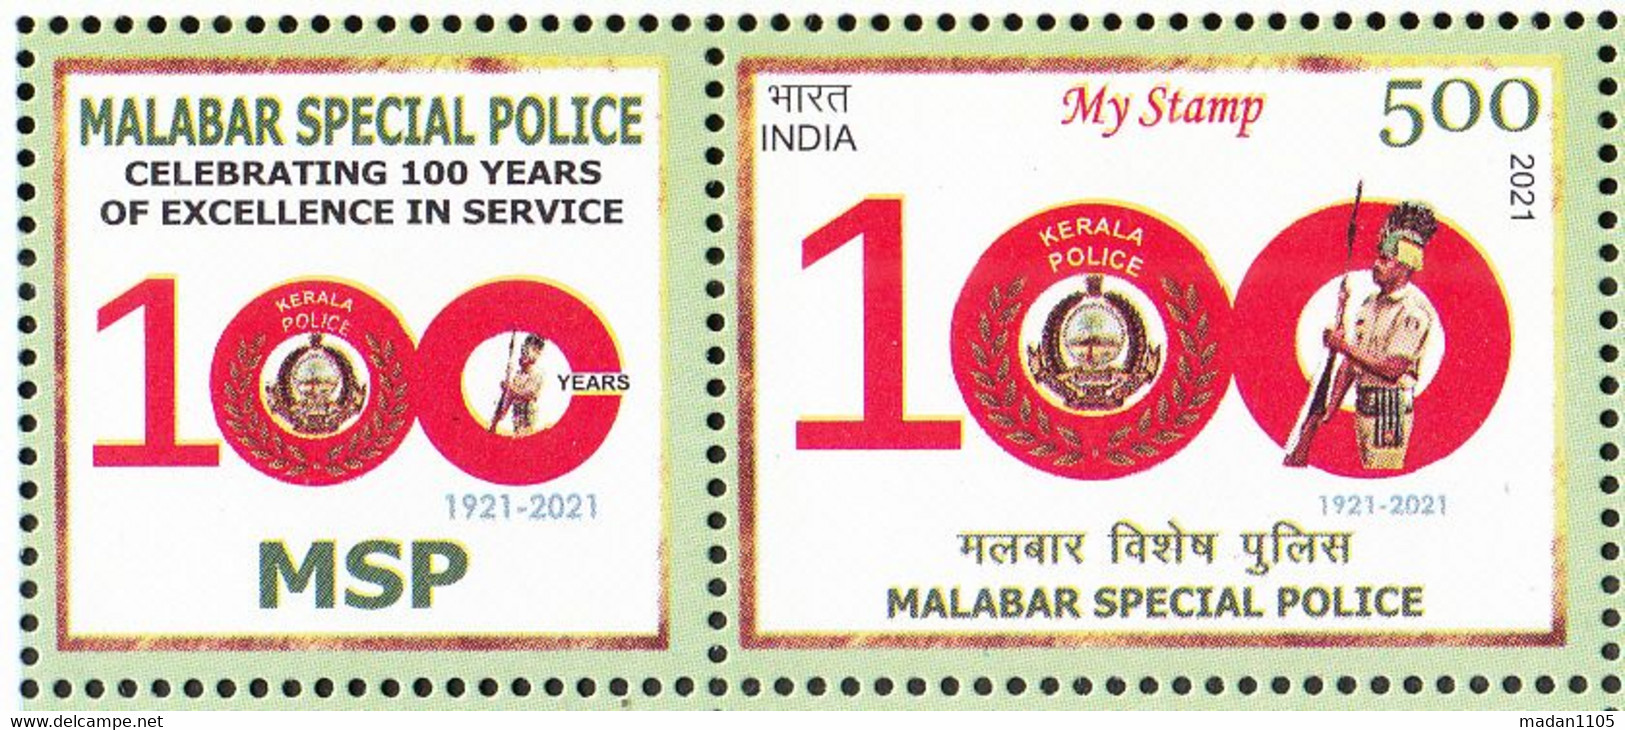 INDIA 2021 MY STAMP, MALABAR SPECIAL POLICE Centenary, Kerala,LIMITED ISSUE ,MNH(**) - Neufs